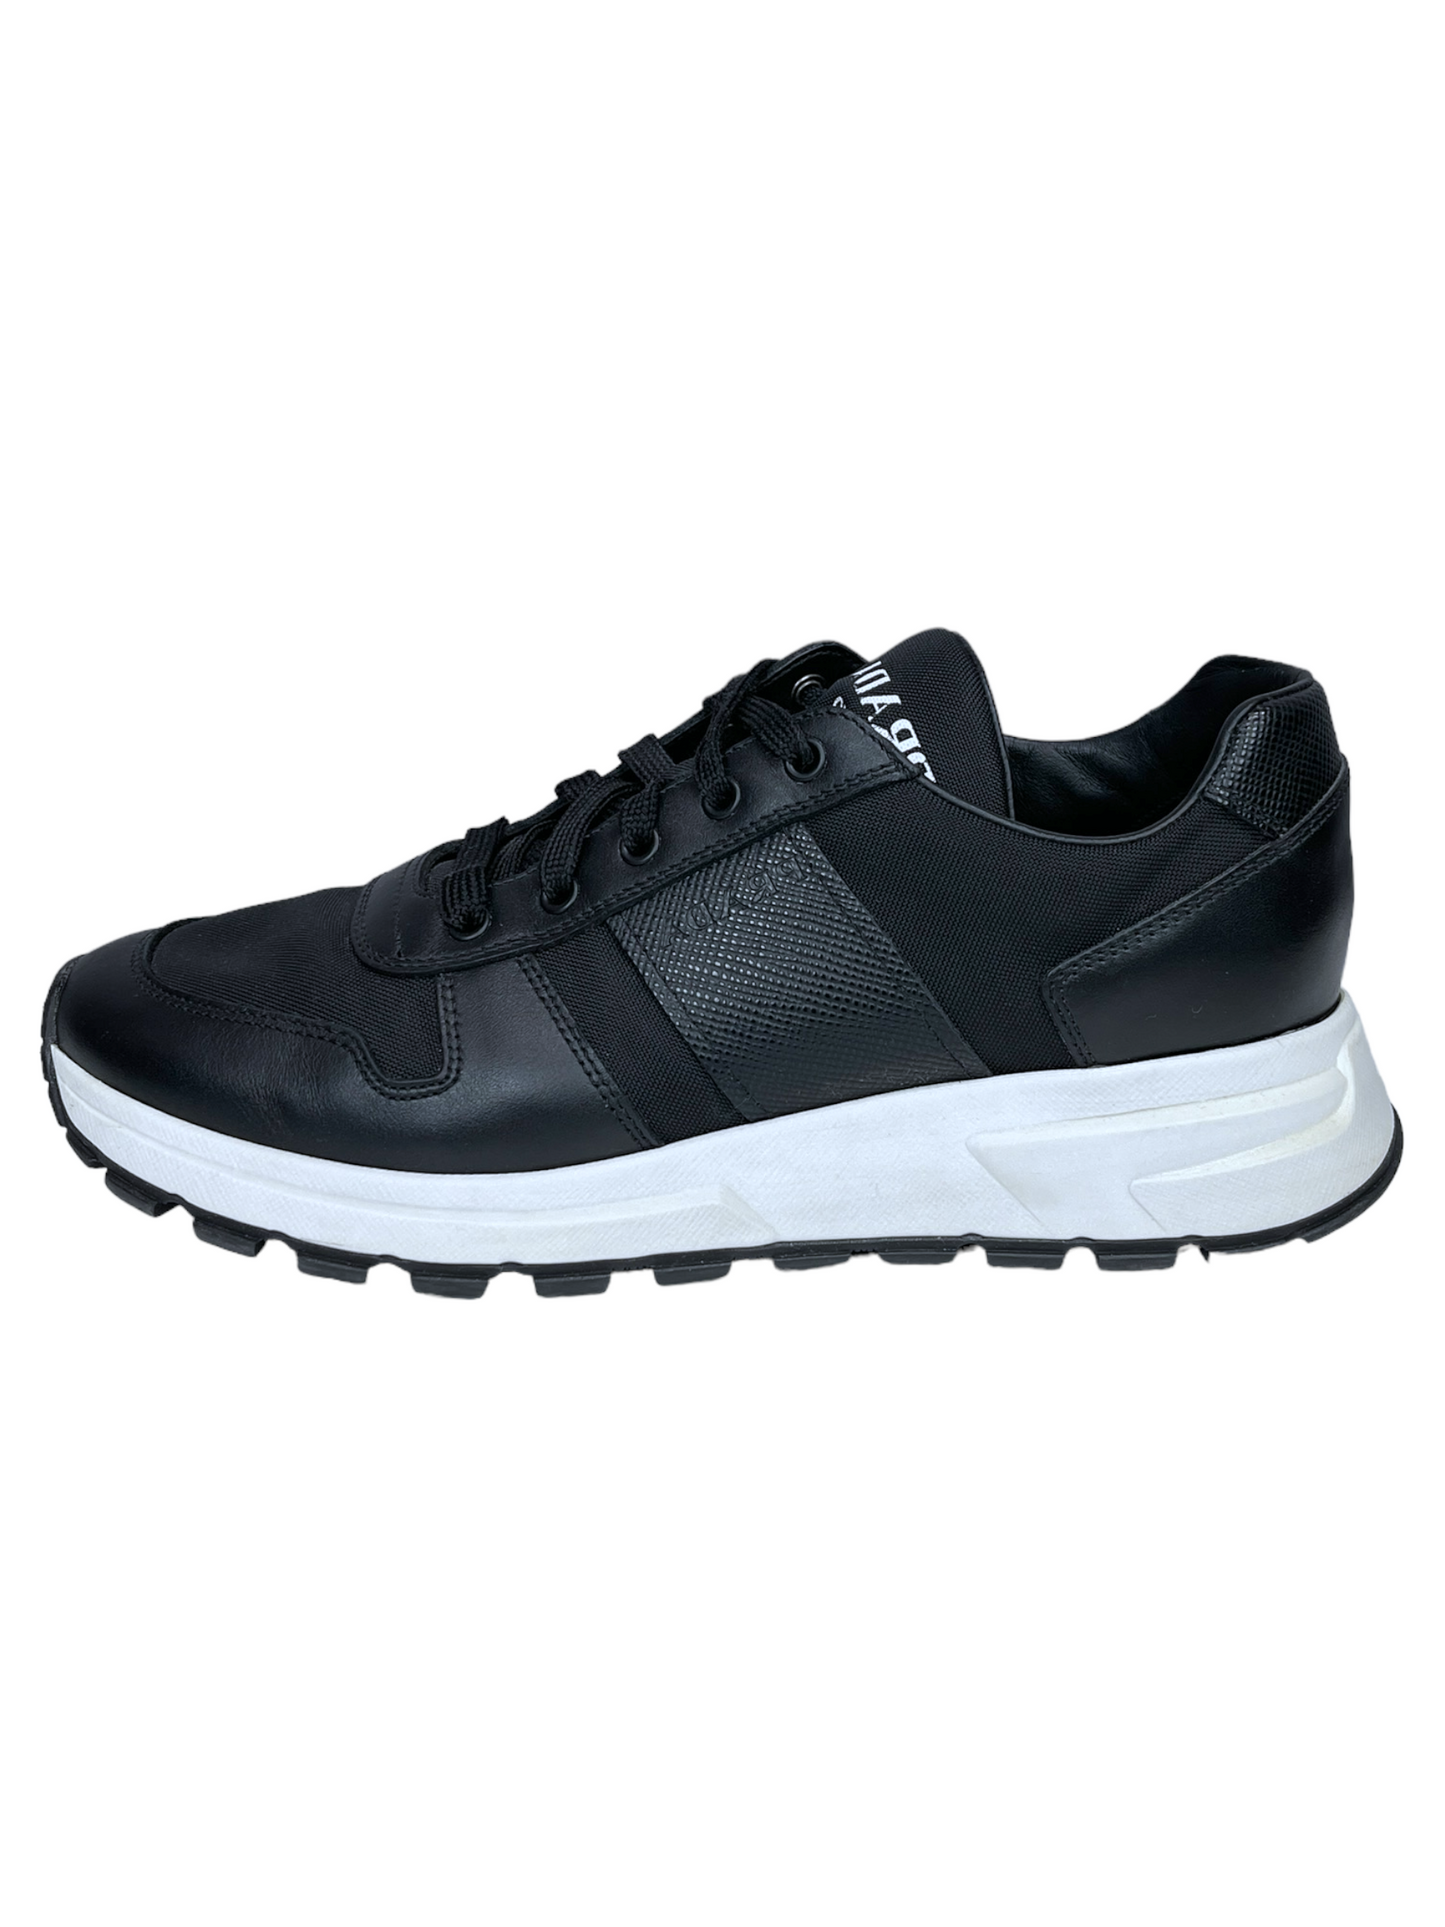 Prada Black Leather Accented Sneakers